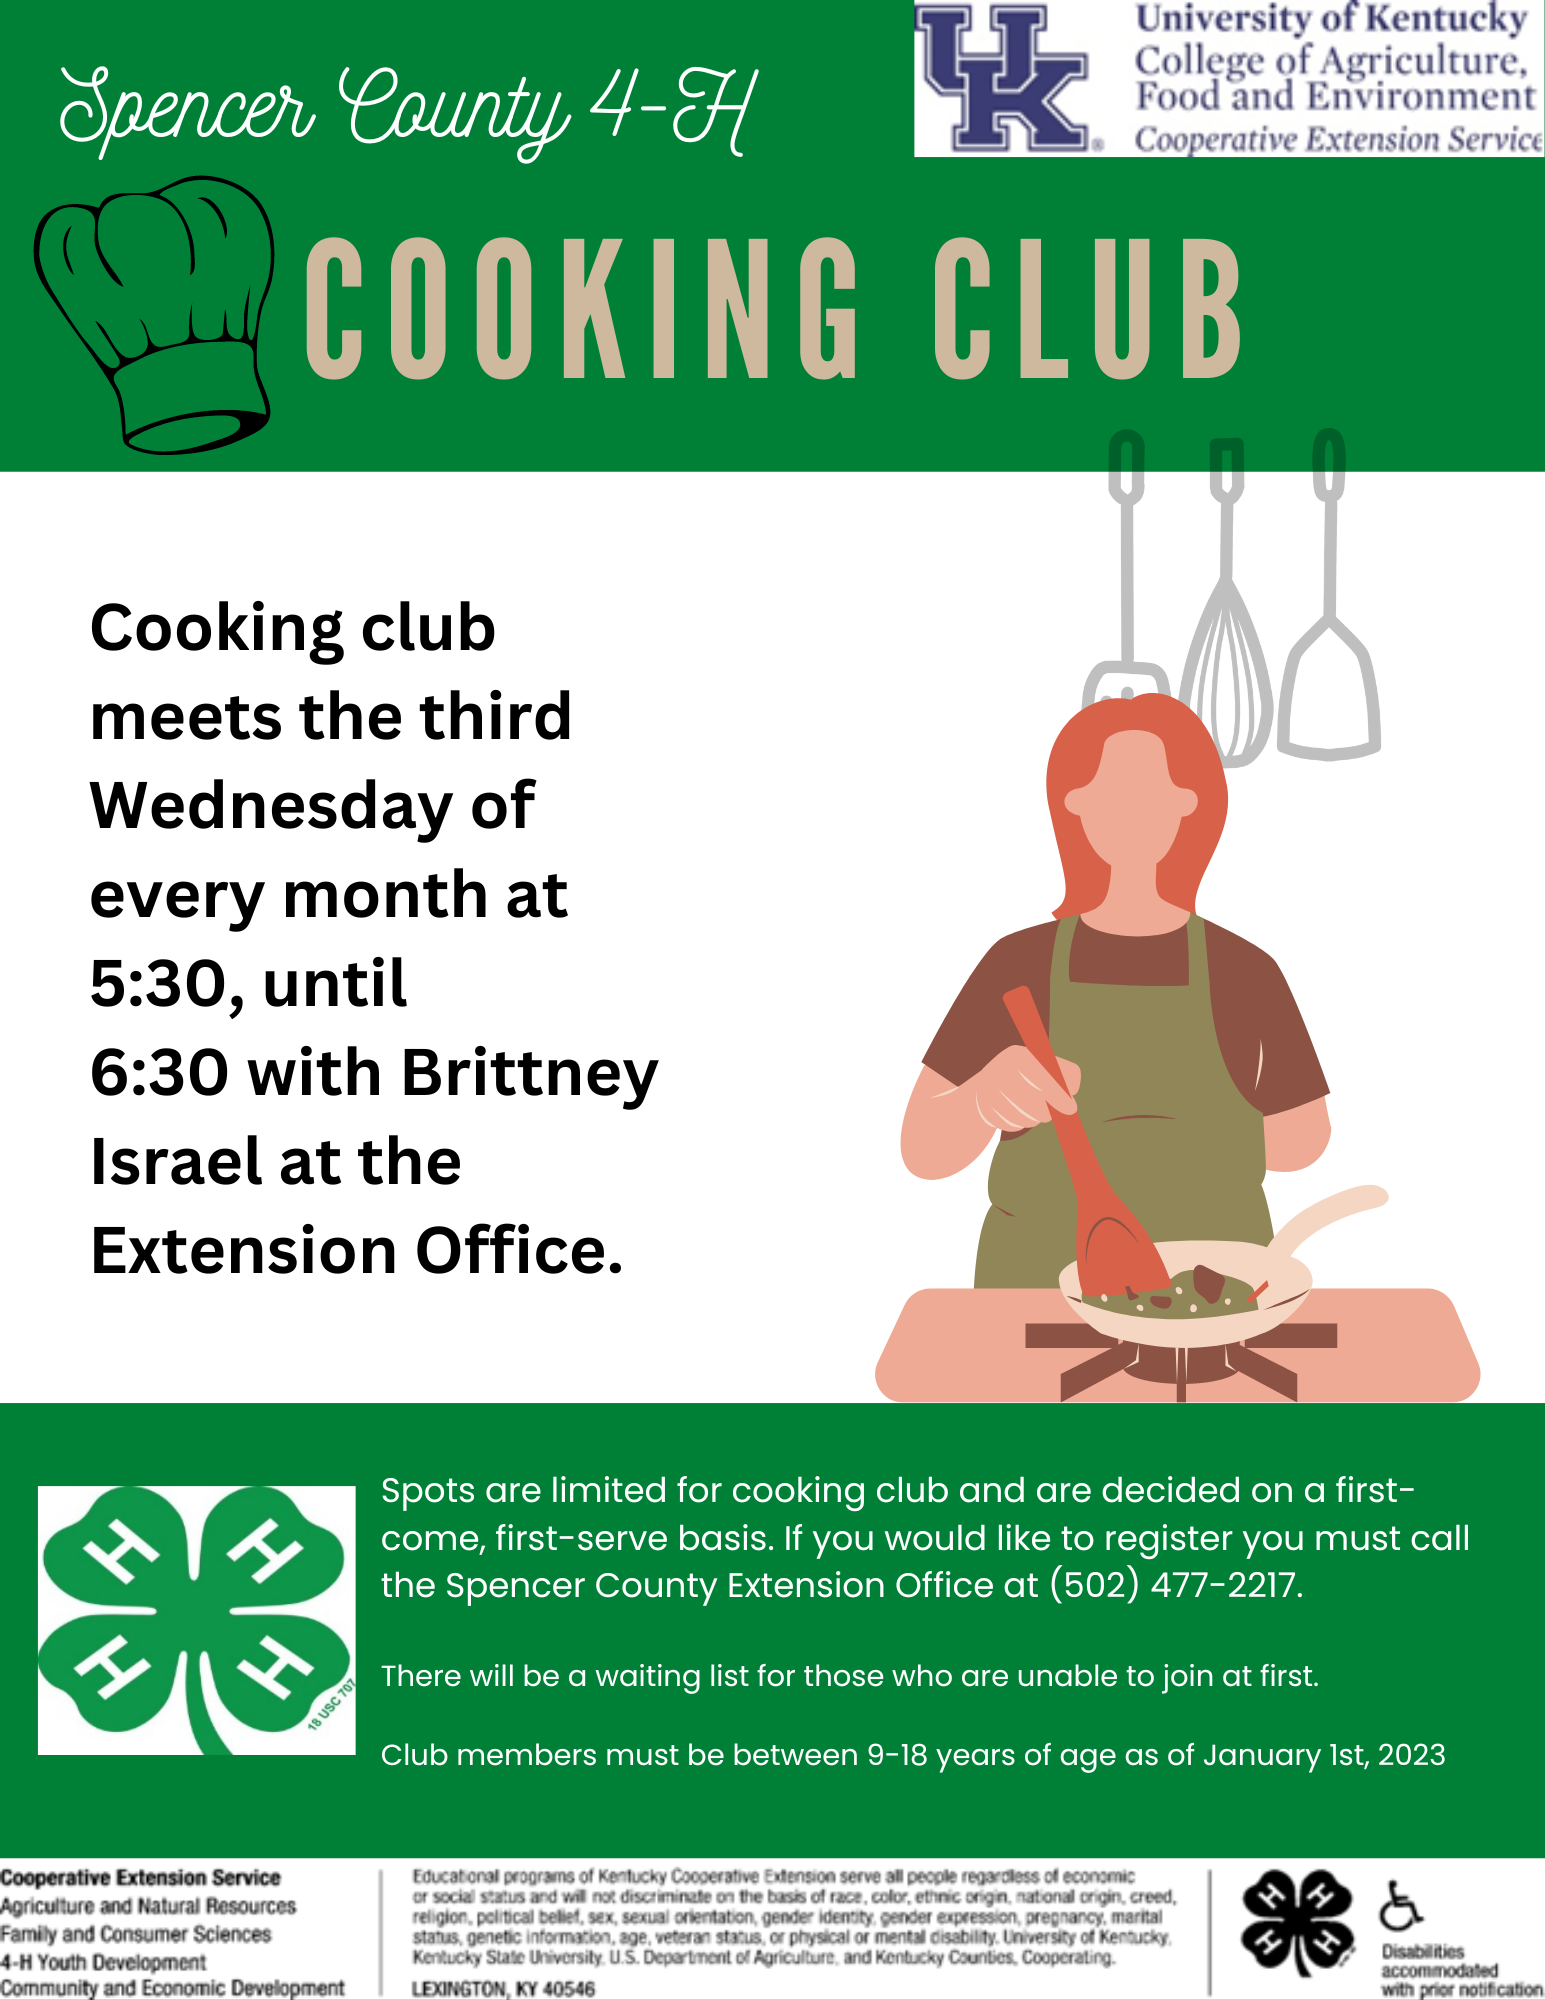 Cooking Club flyer